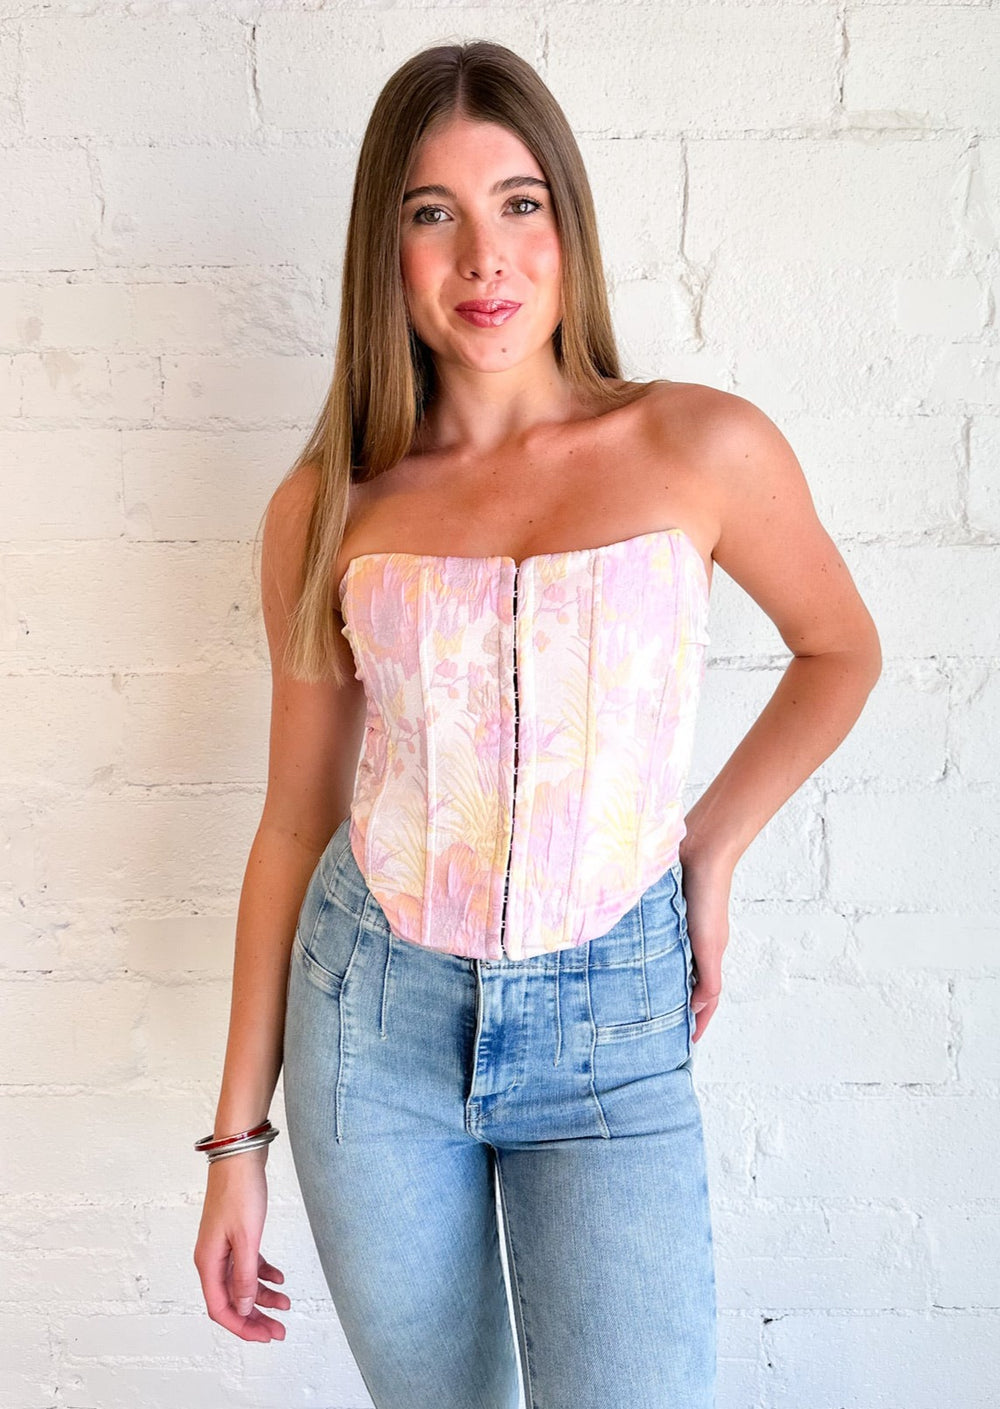 Sweet Disposition Top, Tops, Adeline, Adeline, dallas boutique, dallas texas, texas boutique, women's boutique dallas, adeline boutique, dallas boutique, trendy boutique, affordable boutique